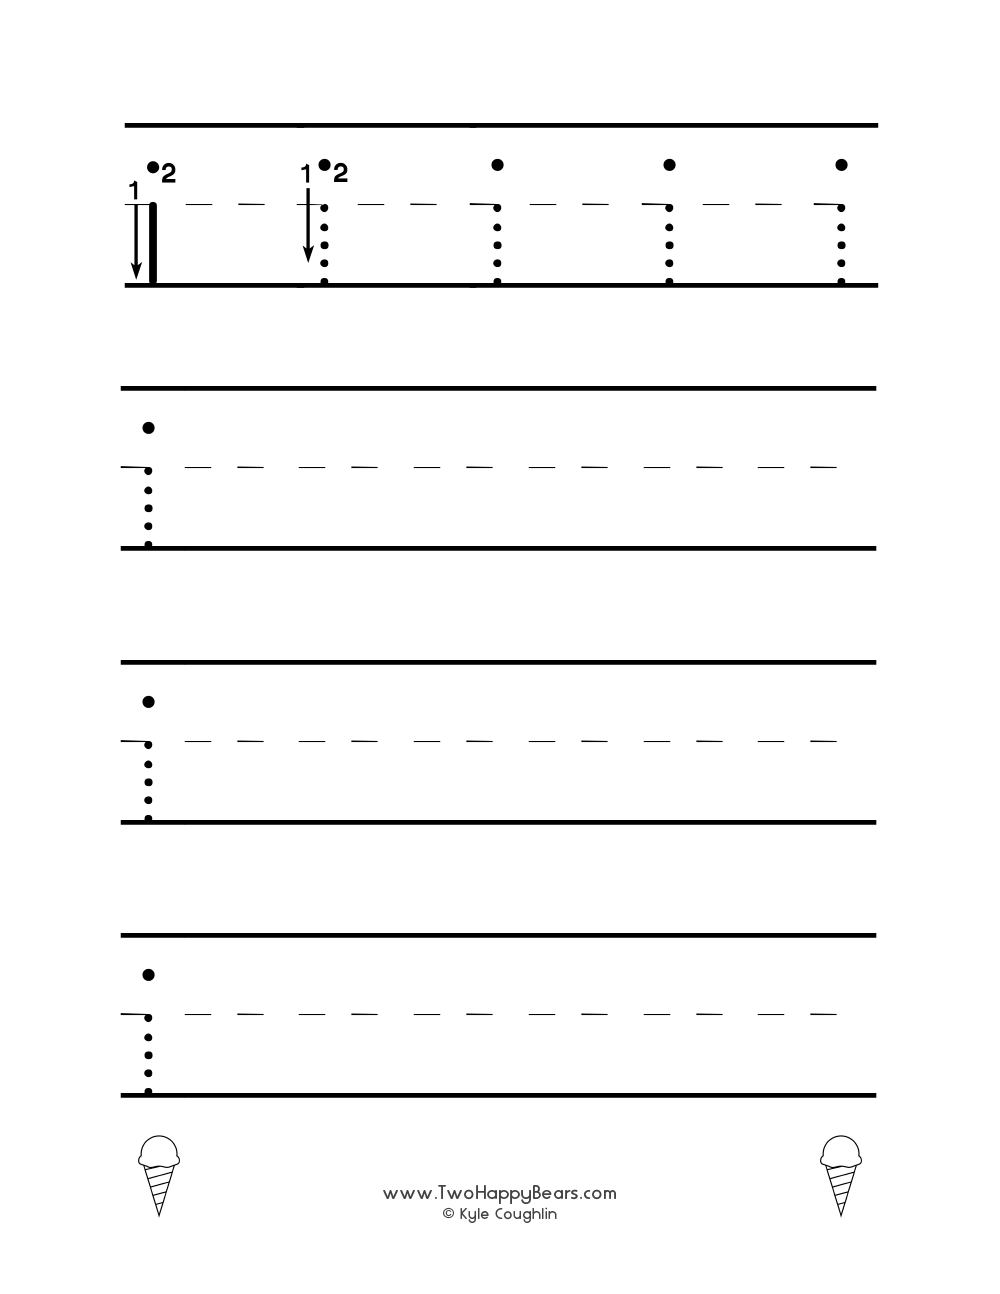 Worksheet for tracing and writing the lowercase letter I, in free printable PDF format.